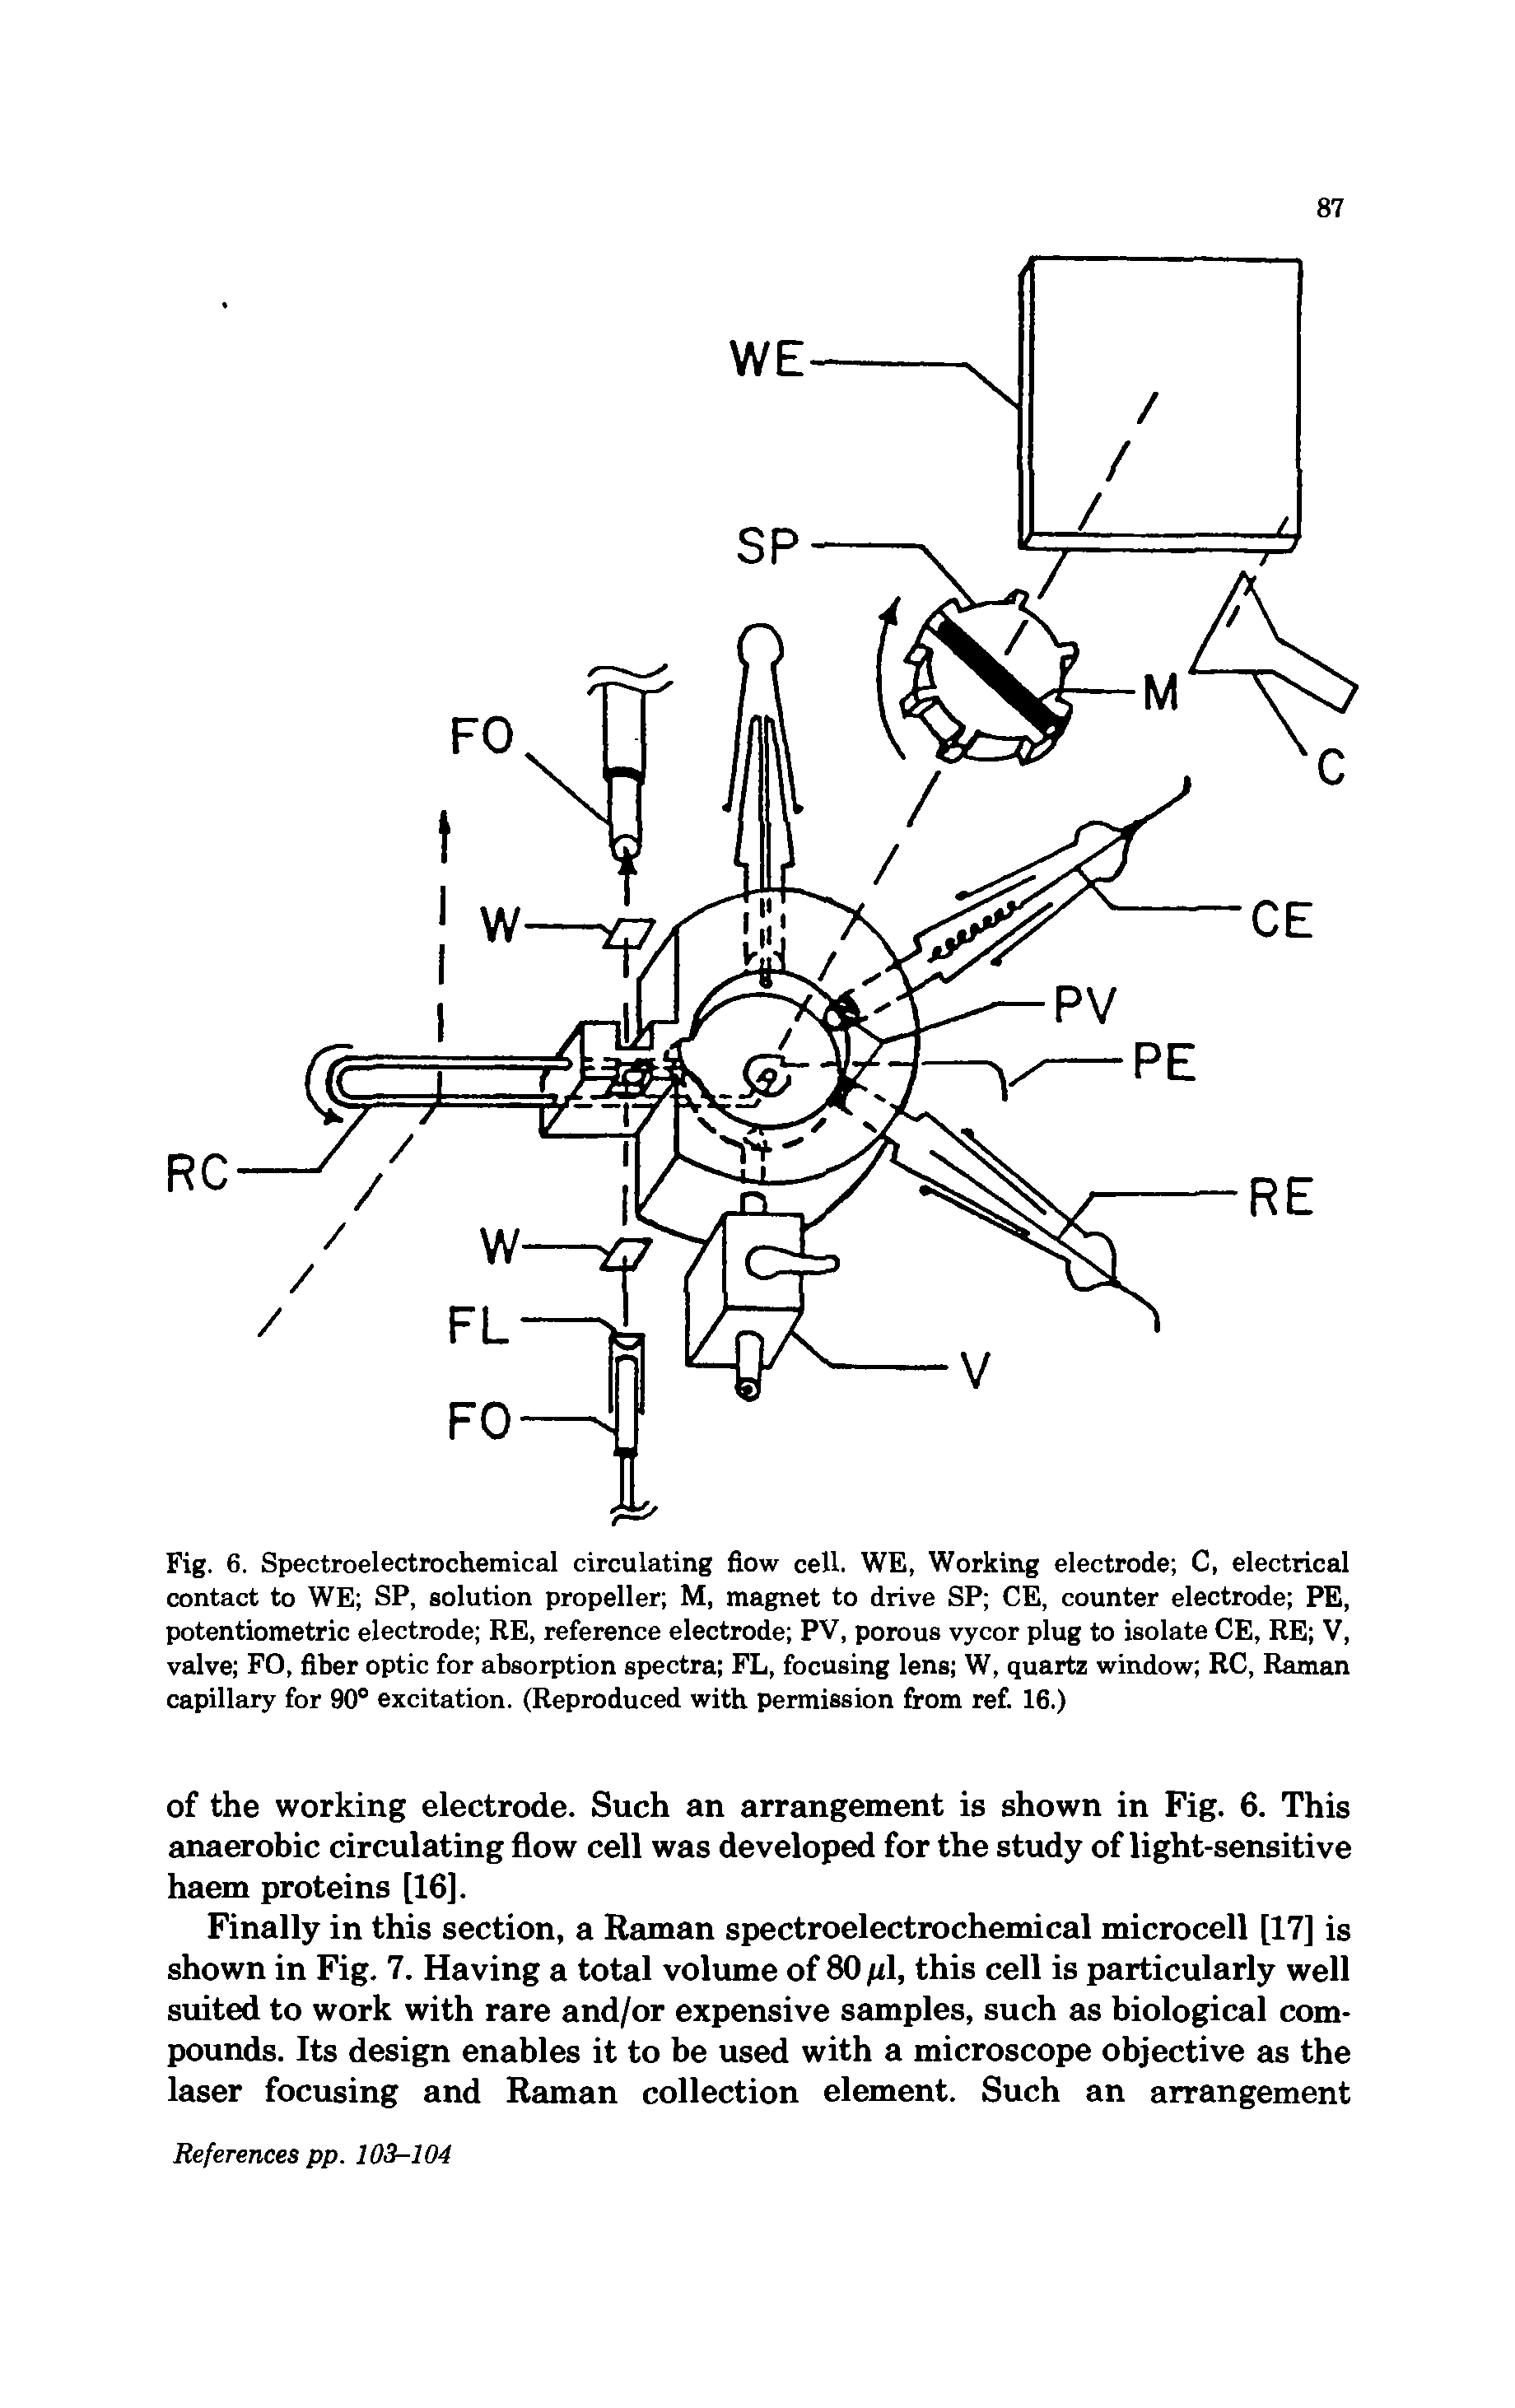 Fig. 6. Spectroelectrochemical circulating flow cell. WE, Working electrode C, electrical contact to WE SP, solution propeller M, magnet to drive SP CE, counter electrode PE, potentiometric electrode RE, reference electrode PV, porous vycor plug to isolate CE, RE V, valve FO, fiber optic for absorption spectra FL, focusing lens W, quartz window RC, Raman capillary for 90° excitation. (Reproduced with permission from ref. 16.)...